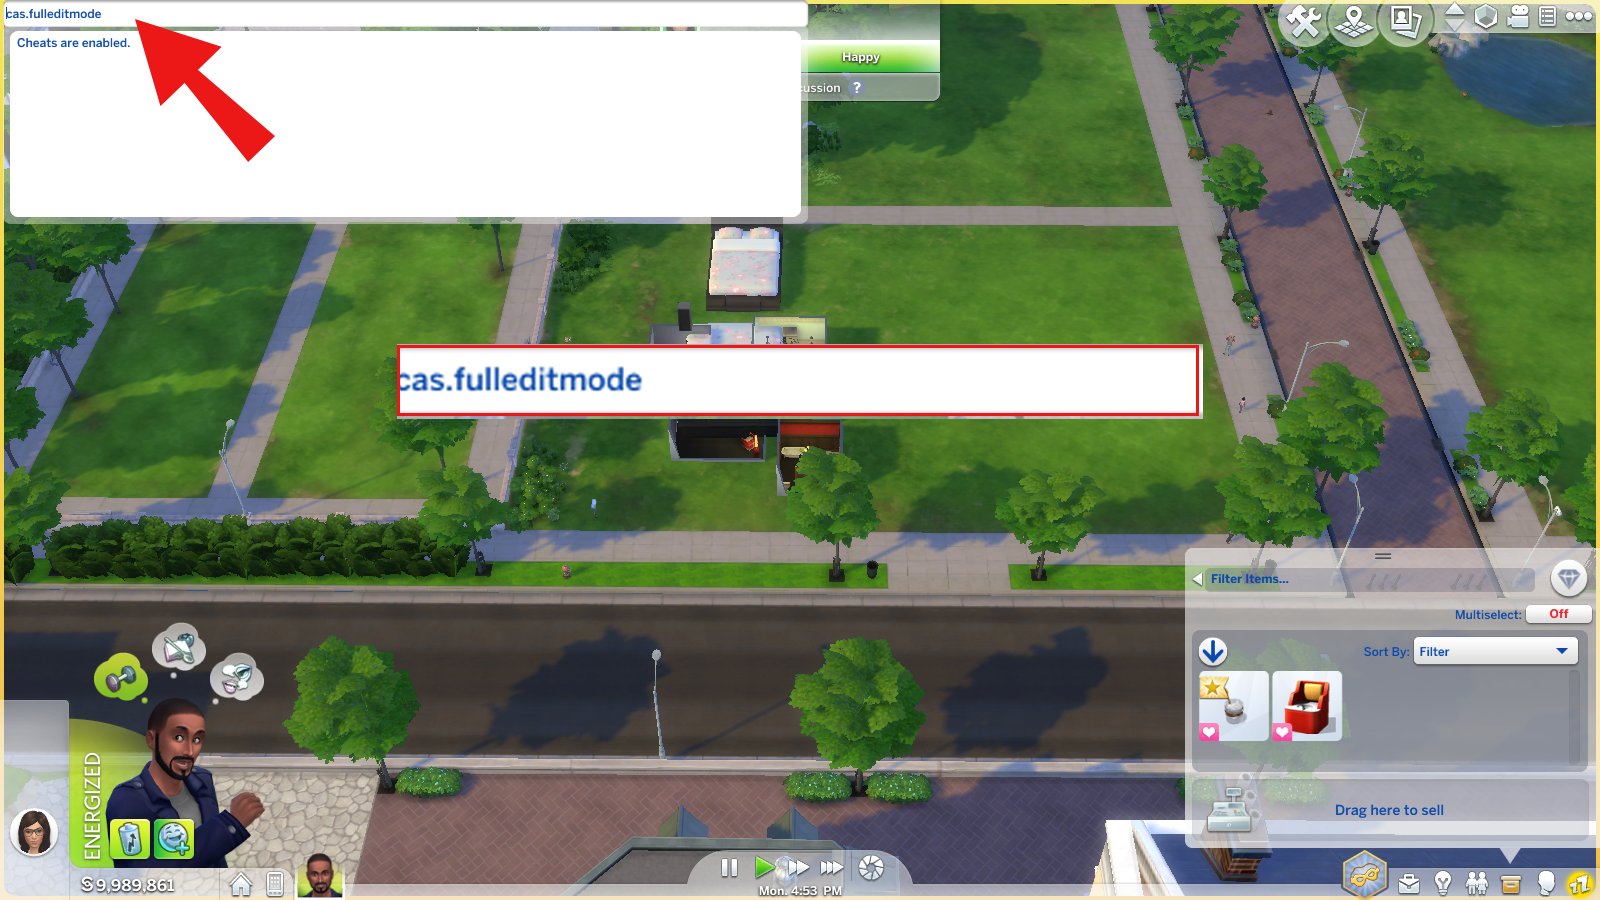 How to Enable Cheats in Sims 4